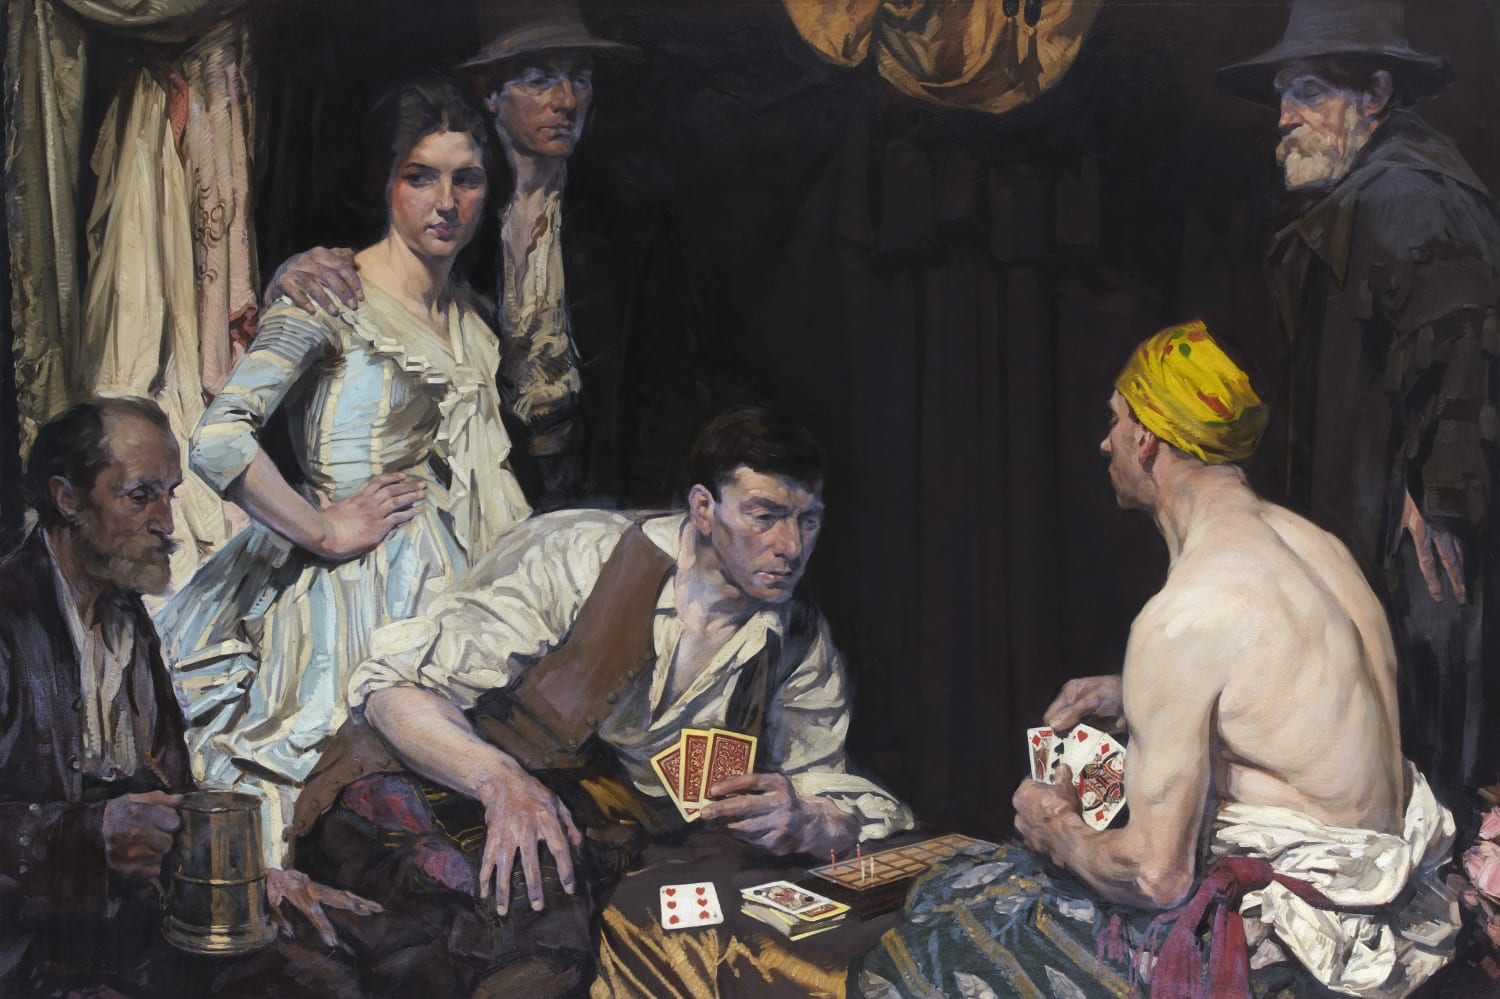 Walter Graham Grieve RSA RSW (1872-1937), The Cribbage Players  Oil on canvas, arouns 1919-20,120.8 x 181.8cm  RSA Diploma Collection (Deposited, 1933) 2000.078